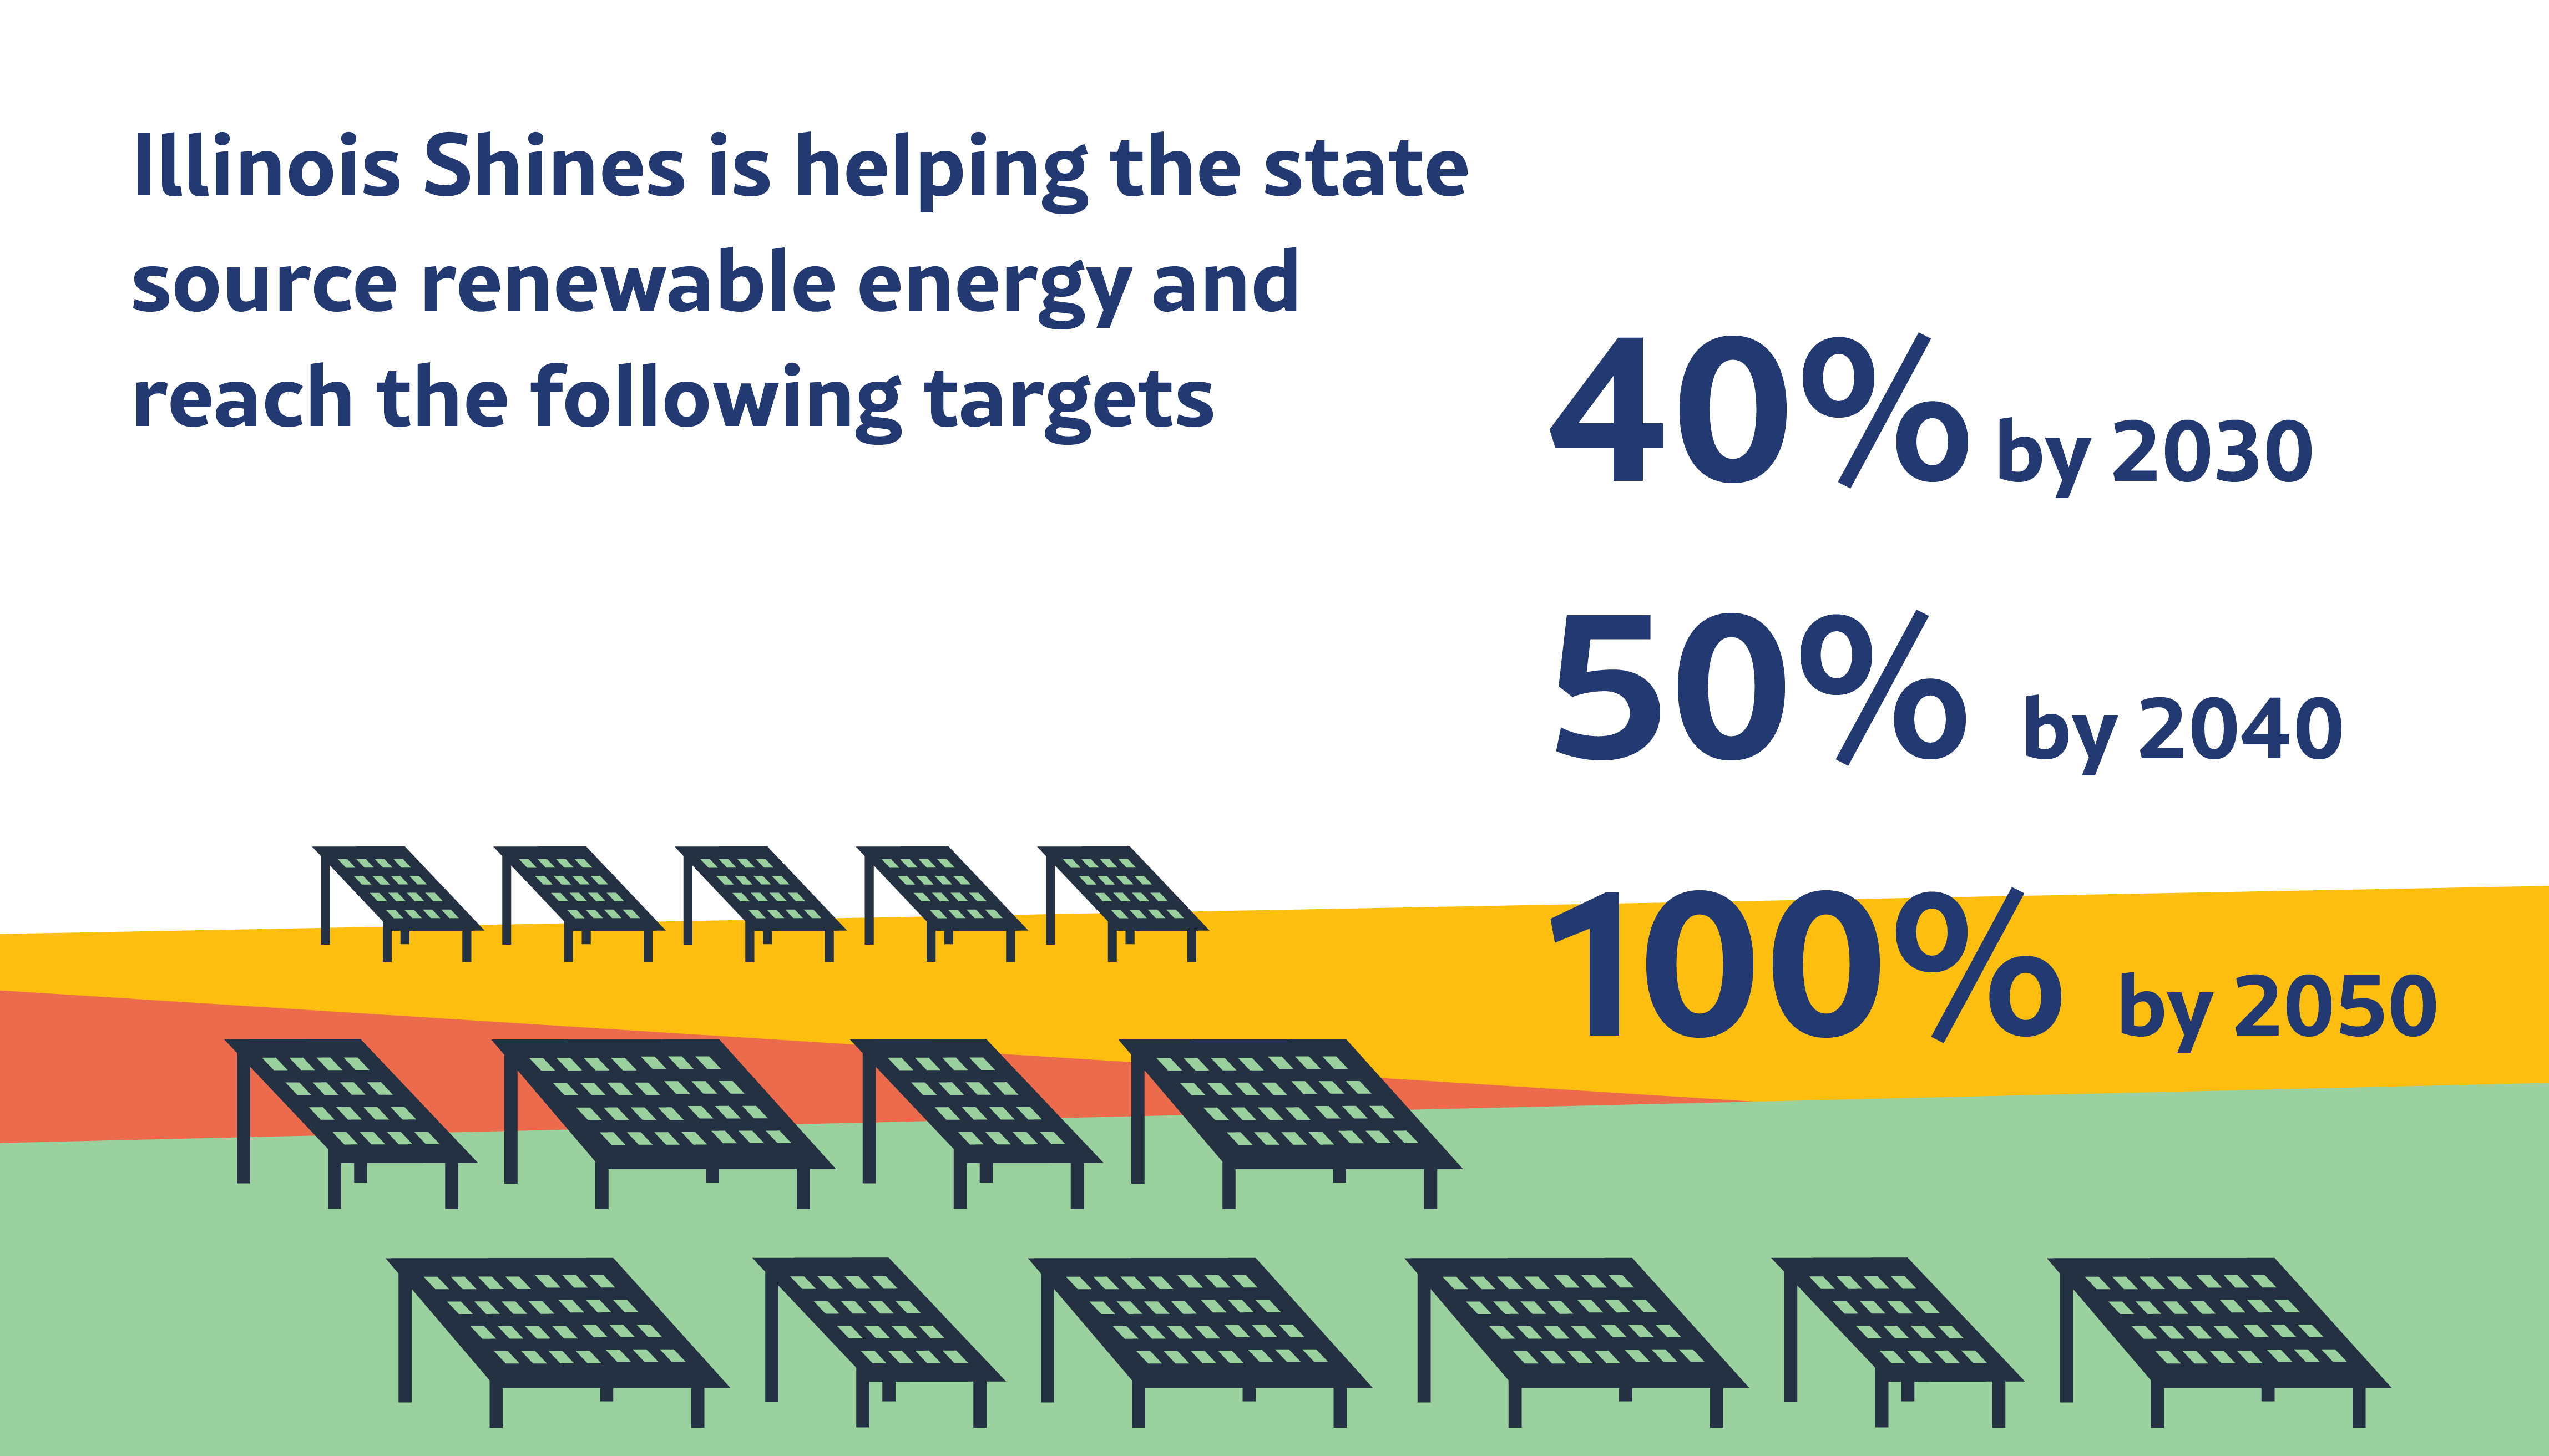 Graphic of IL Shines renewable energy targets. The program will help the state source this amount of renewable energy by year: 40% by 2030, 50% by 2040, 100% by 2050.